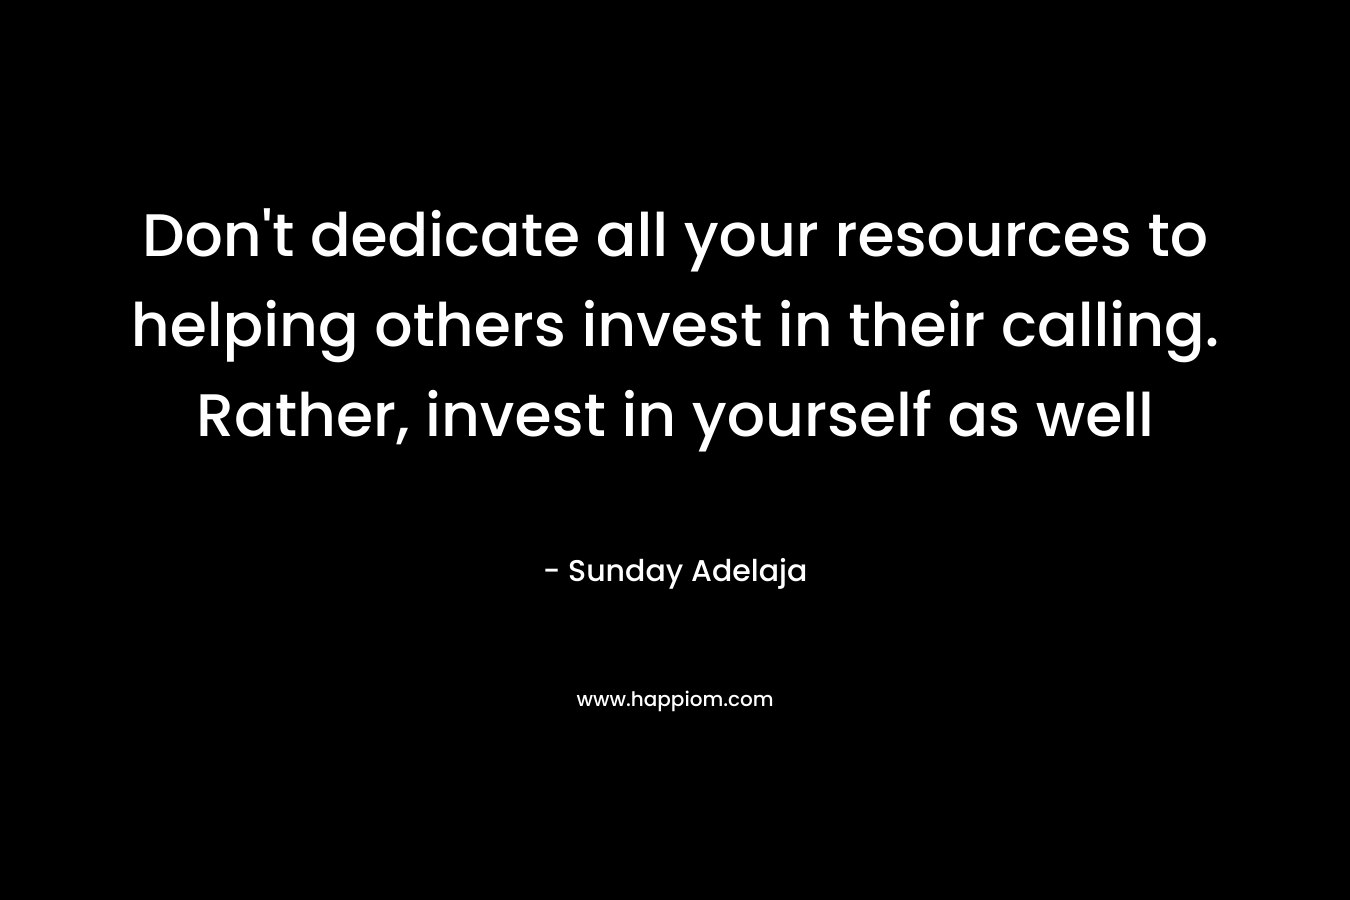 Don't dedicate all your resources to helping others invest in their calling. Rather, invest in yourself as well